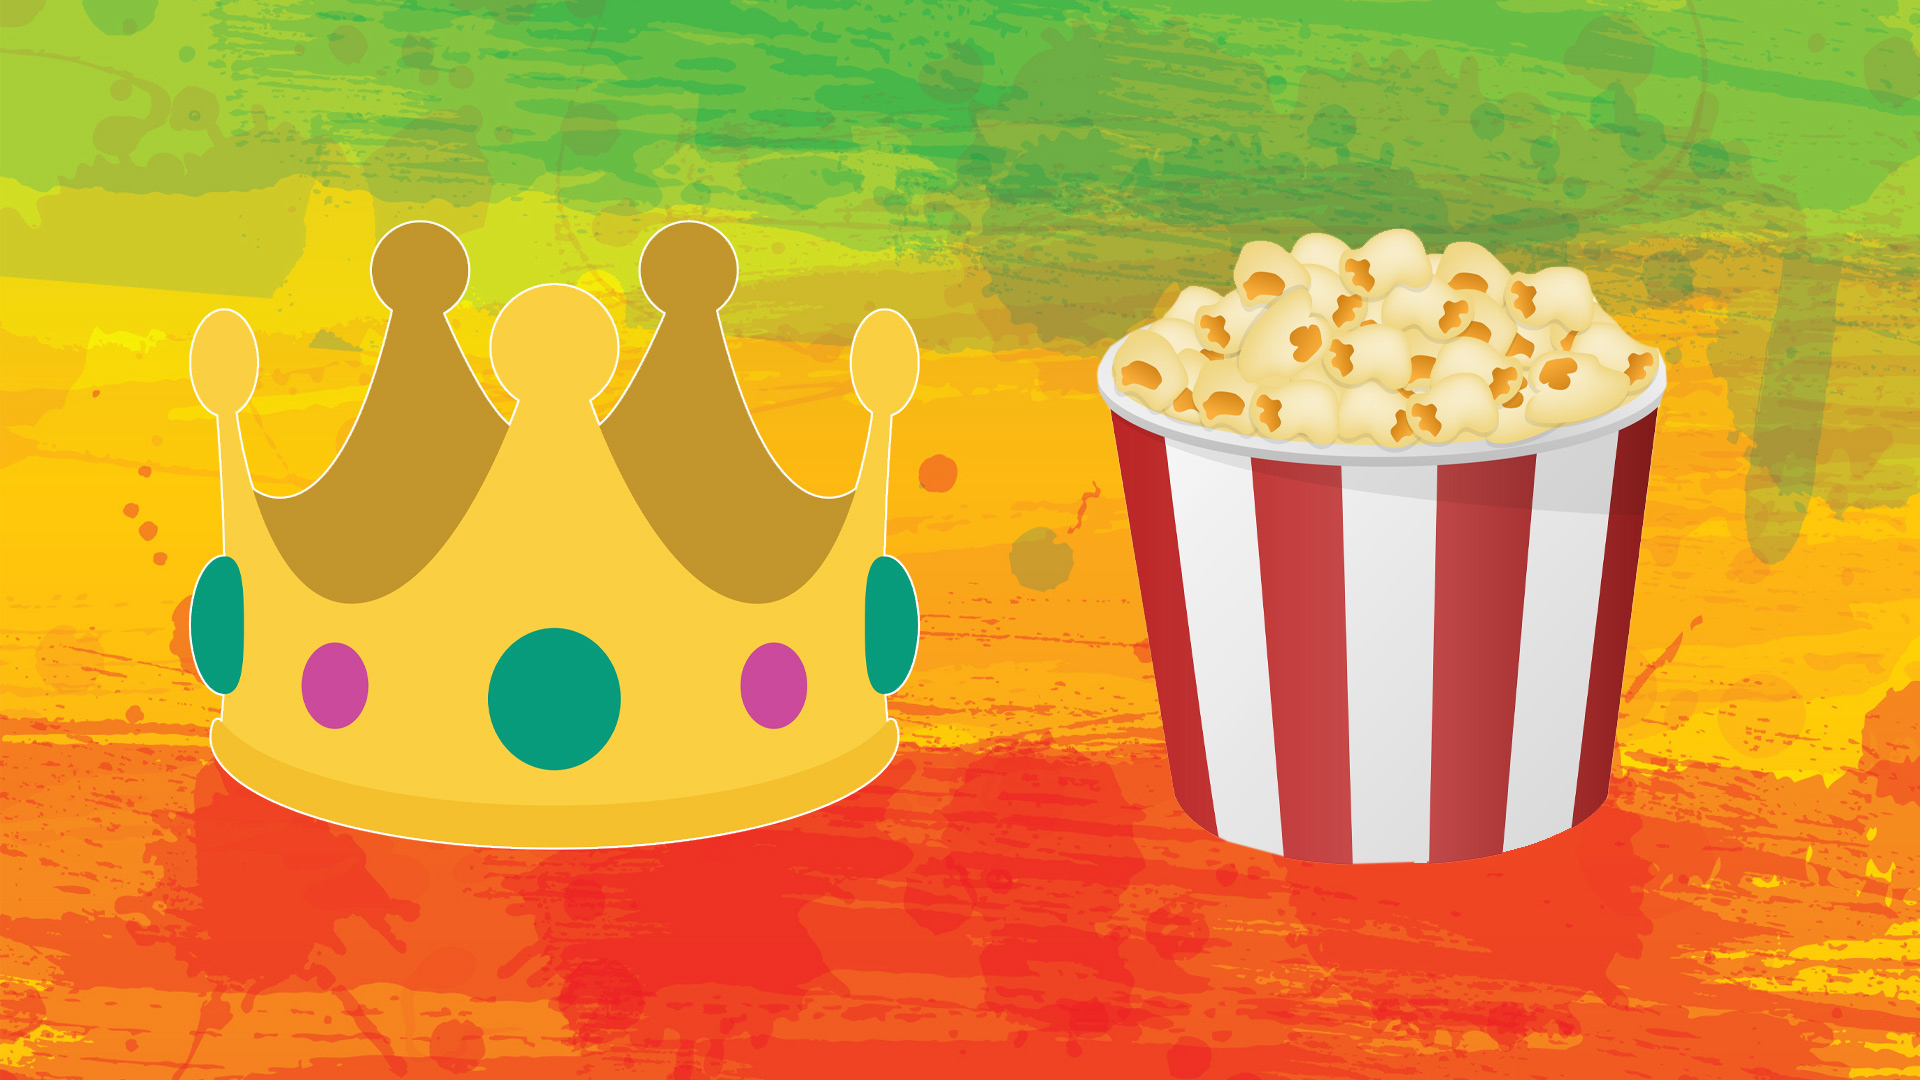 A crown and popcorn